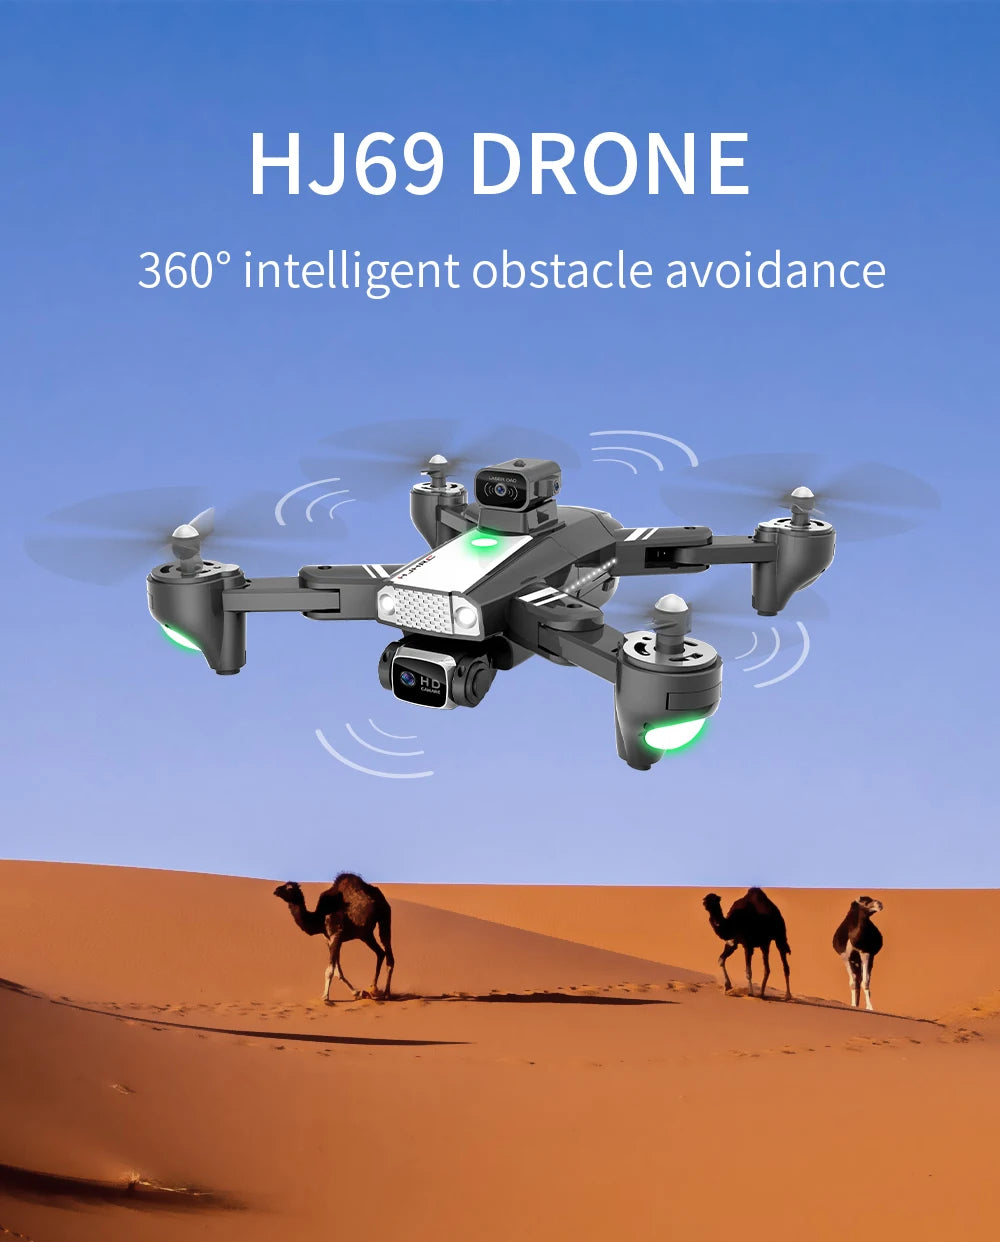 HJ69 Max Drone, hj69 drone 3609 intelligent obstacle avoidance